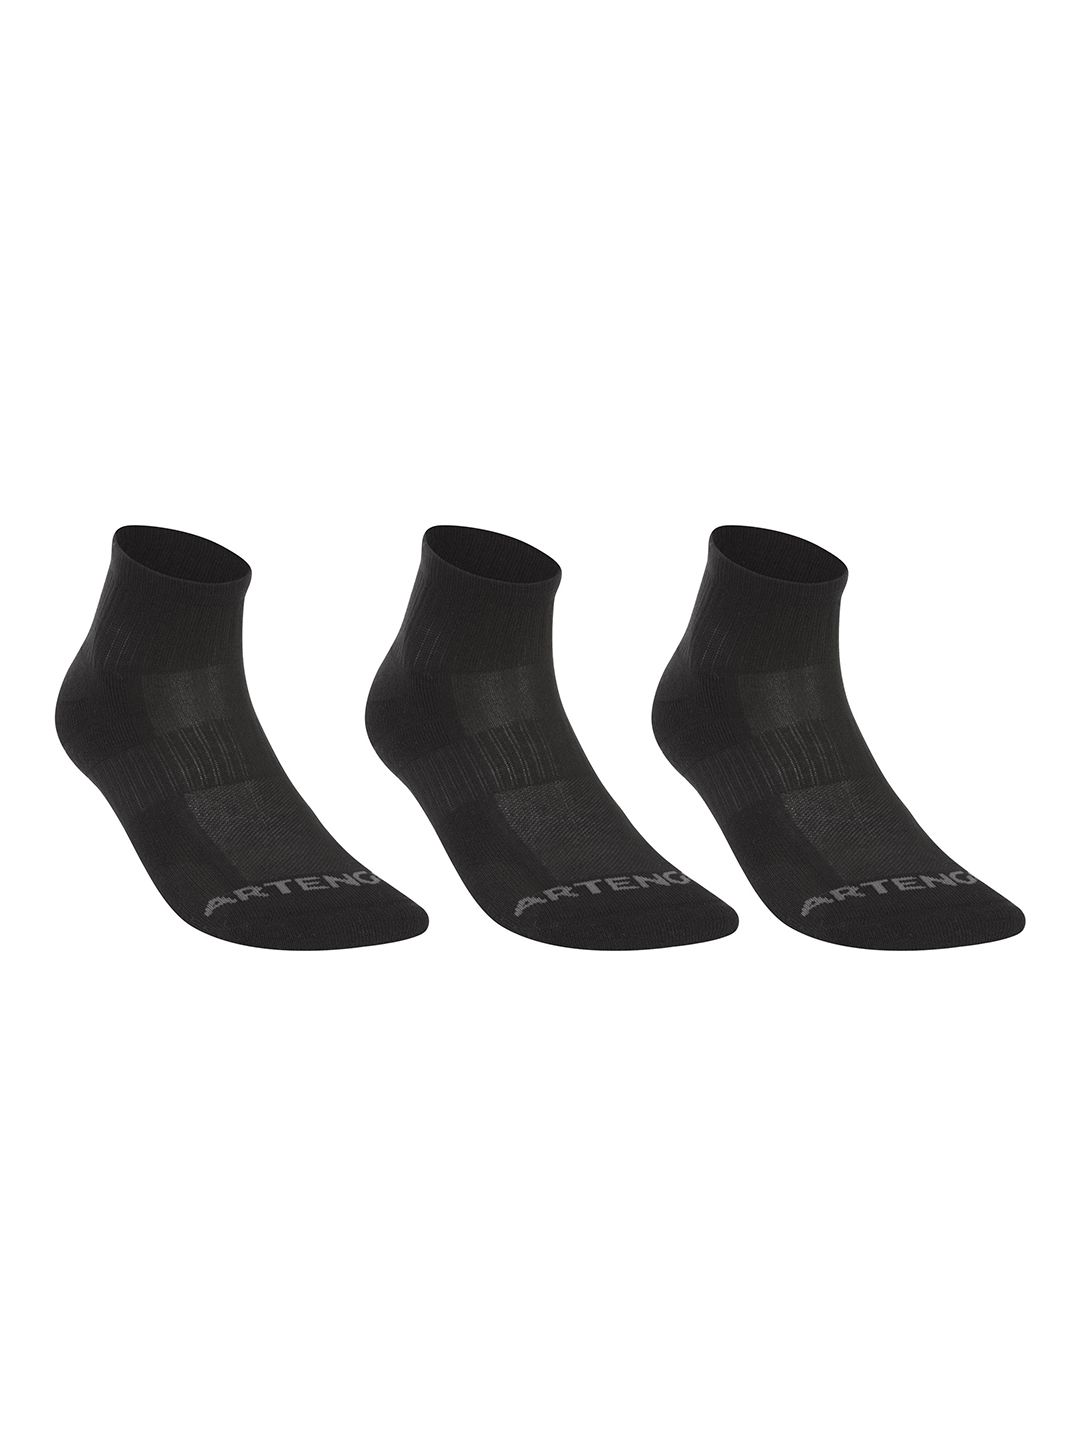 Artengo By Decathlon Unisex Pack Of 3 Brown Solid Ankle Length Socks Price in India